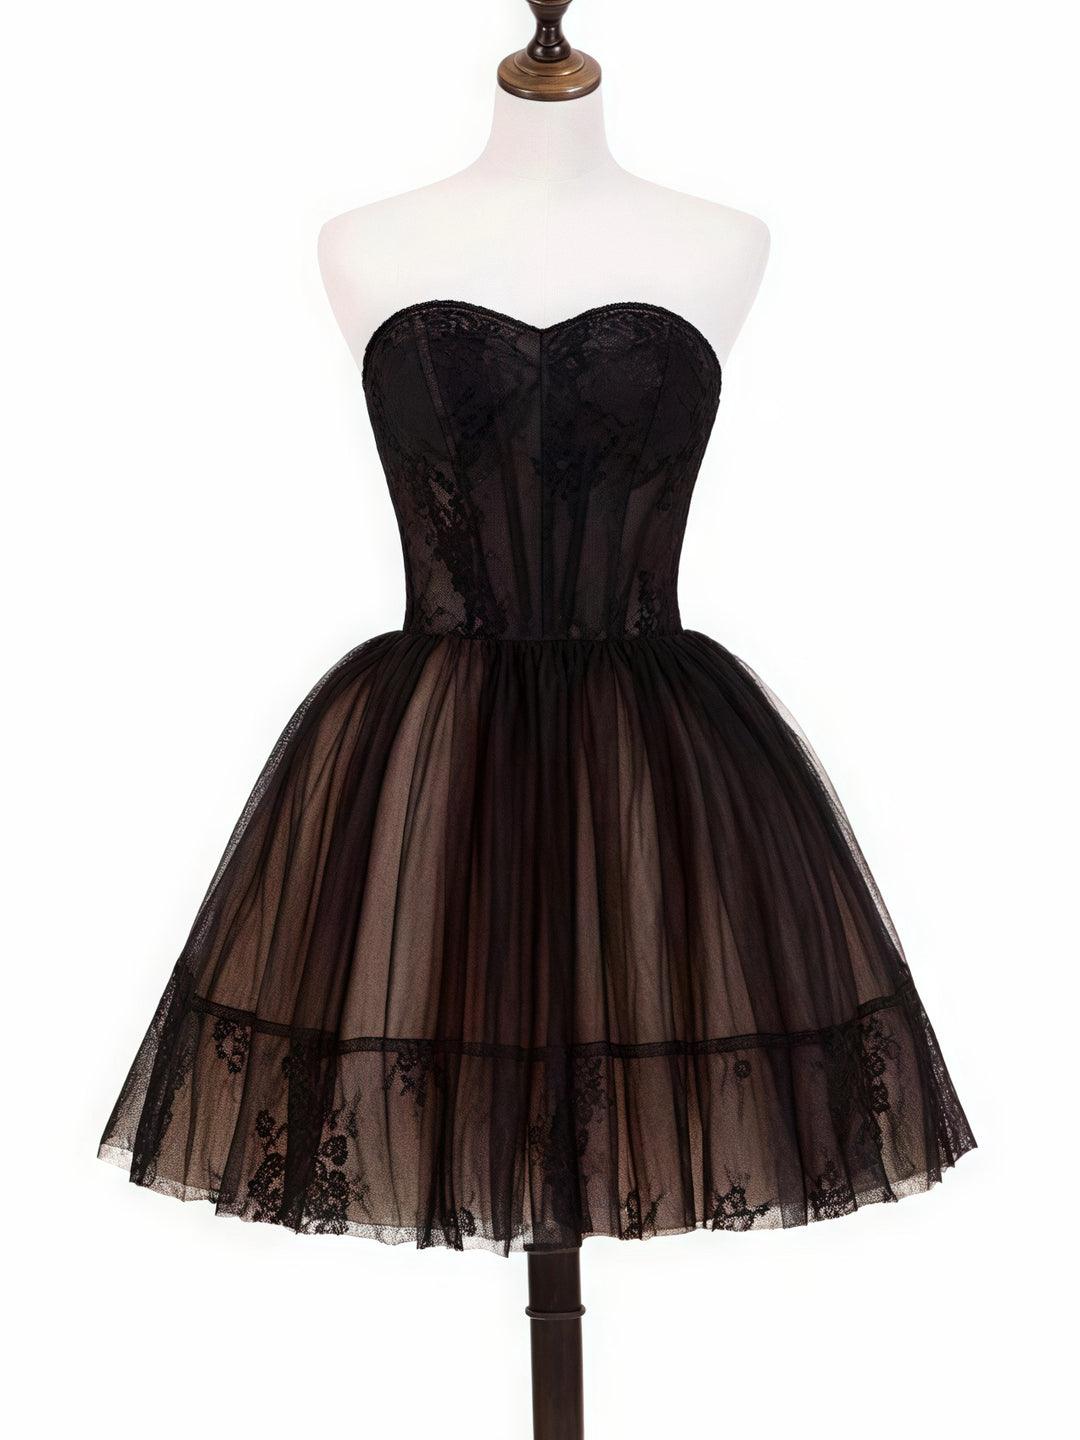 A-Line/Princess Strapless Sleeveless Short/Mini Party Dance Cocktail Homecoming Dress With Corset Bodice